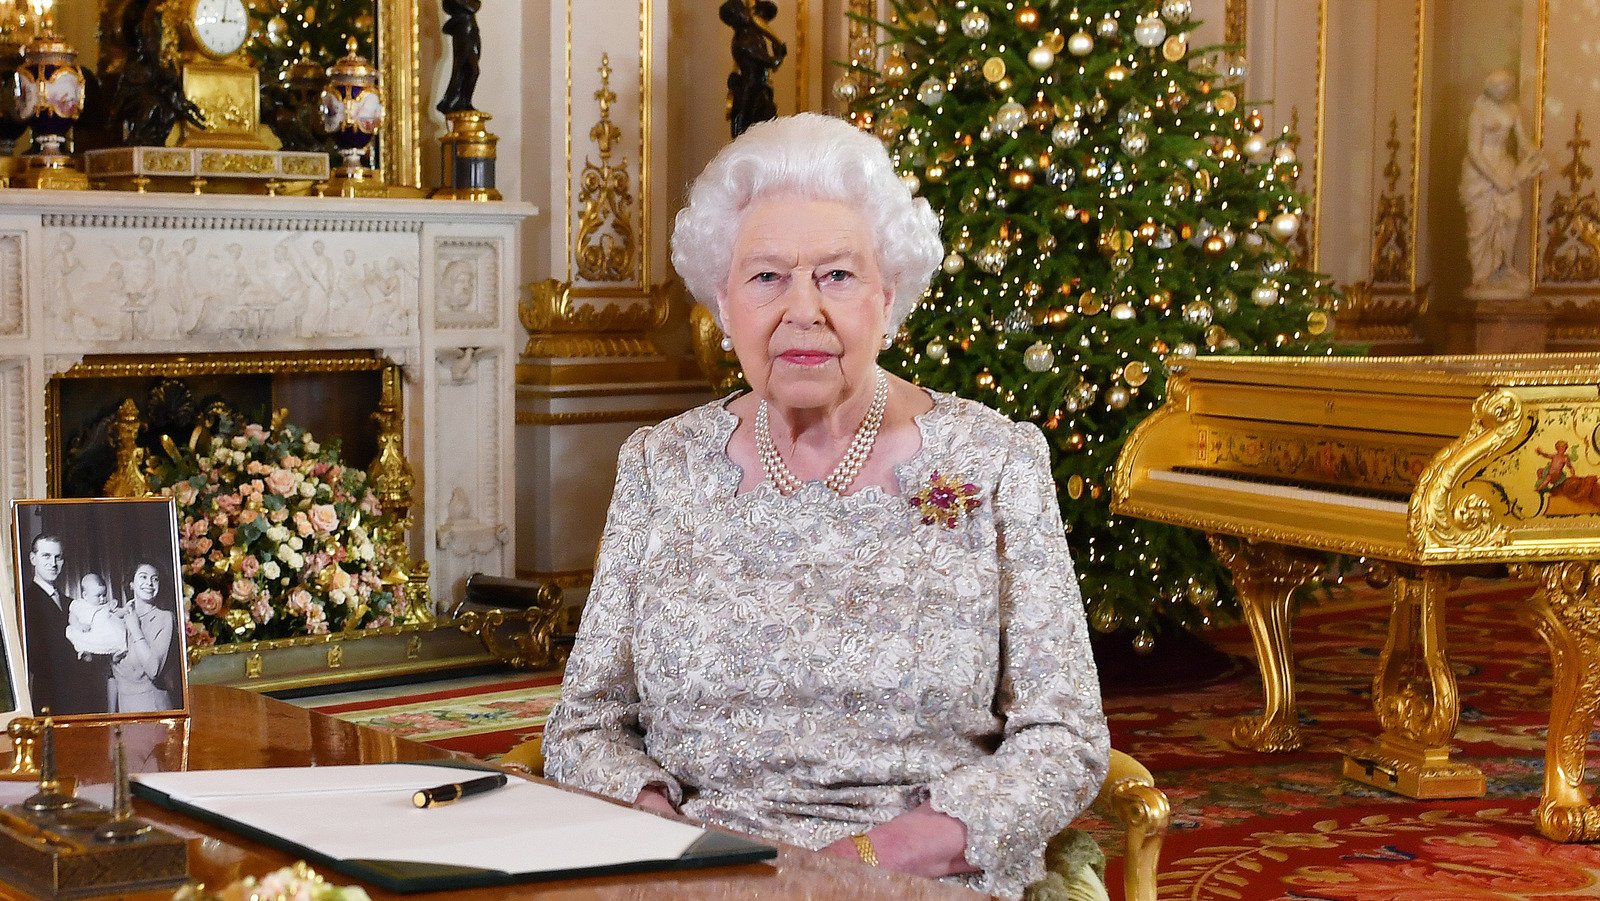 This Is What The Royal Family Eats For Christmas Dinner